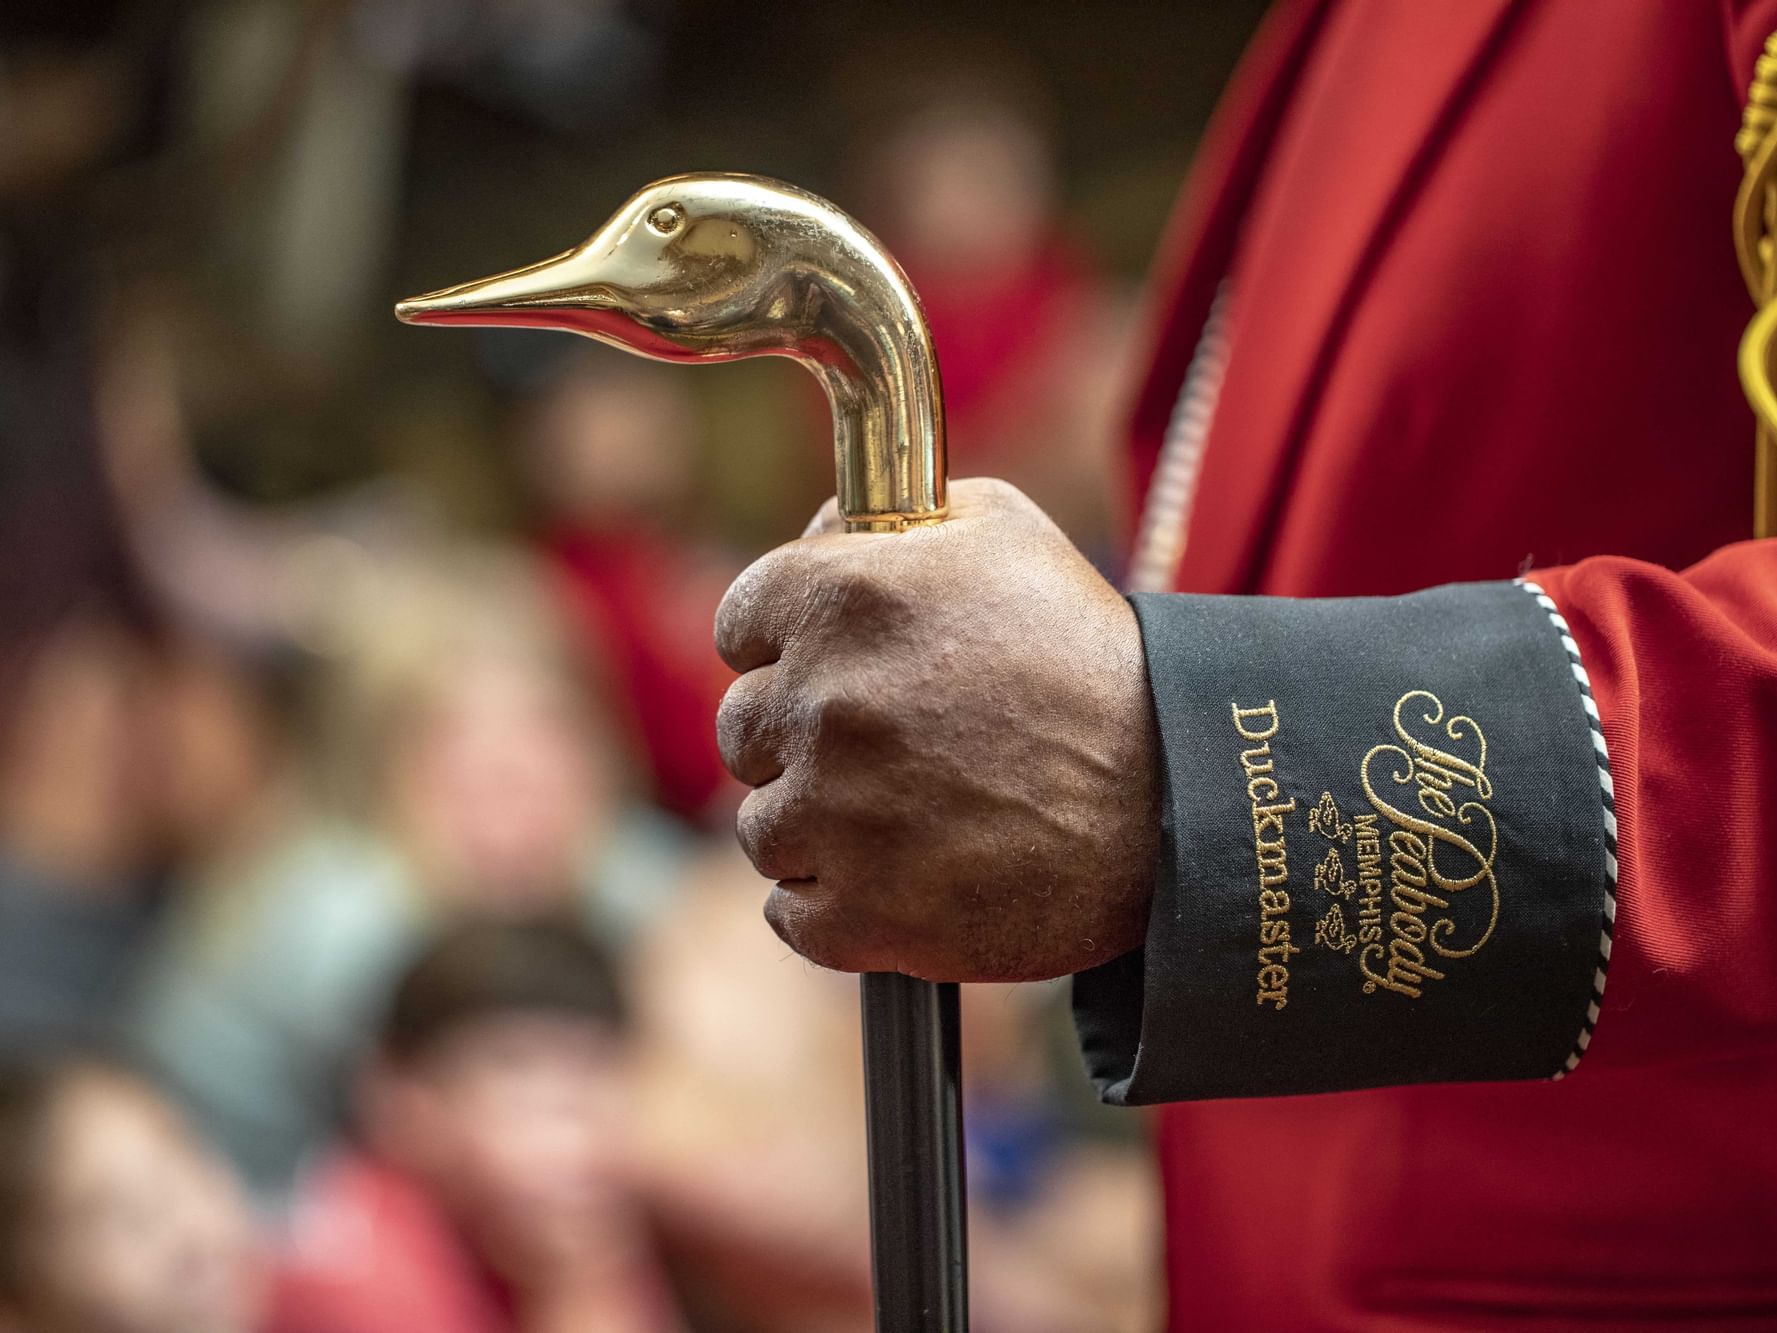 March of the Ducks | Special Offer | The Peabody Memphis